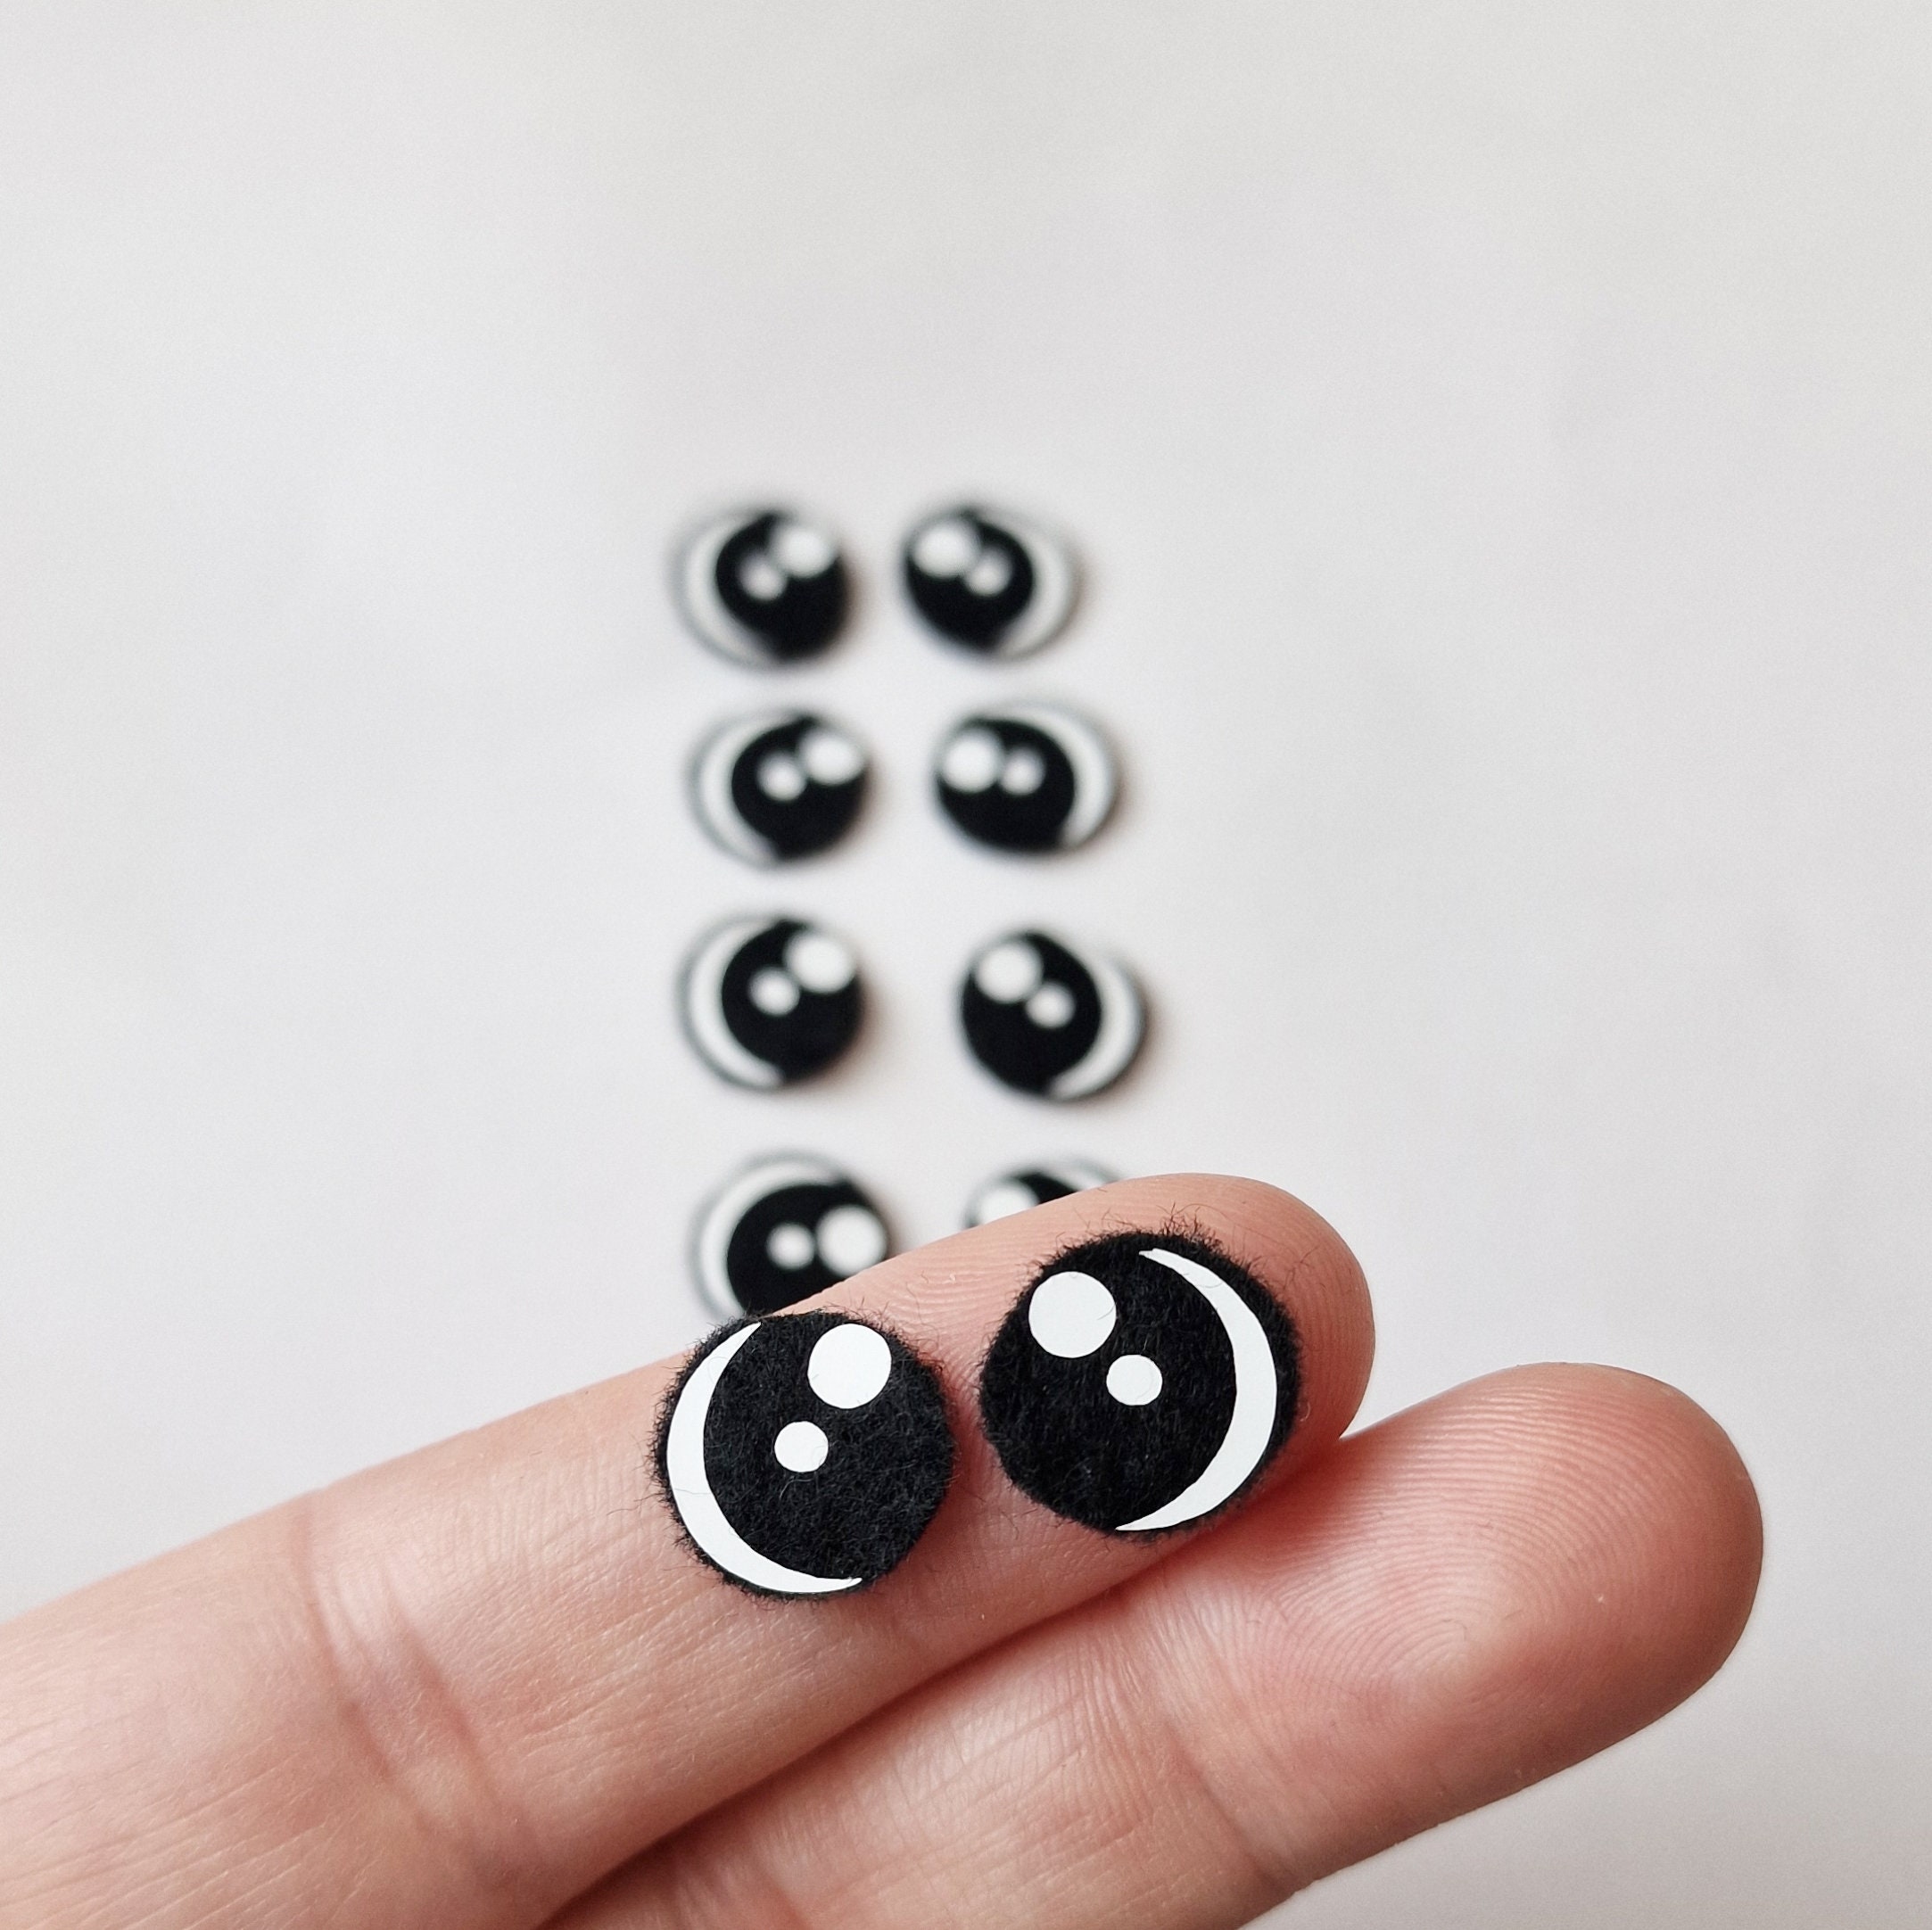 8mm Kawaii Style Round Safety Eyes and Washers: 5 Pairs Doll